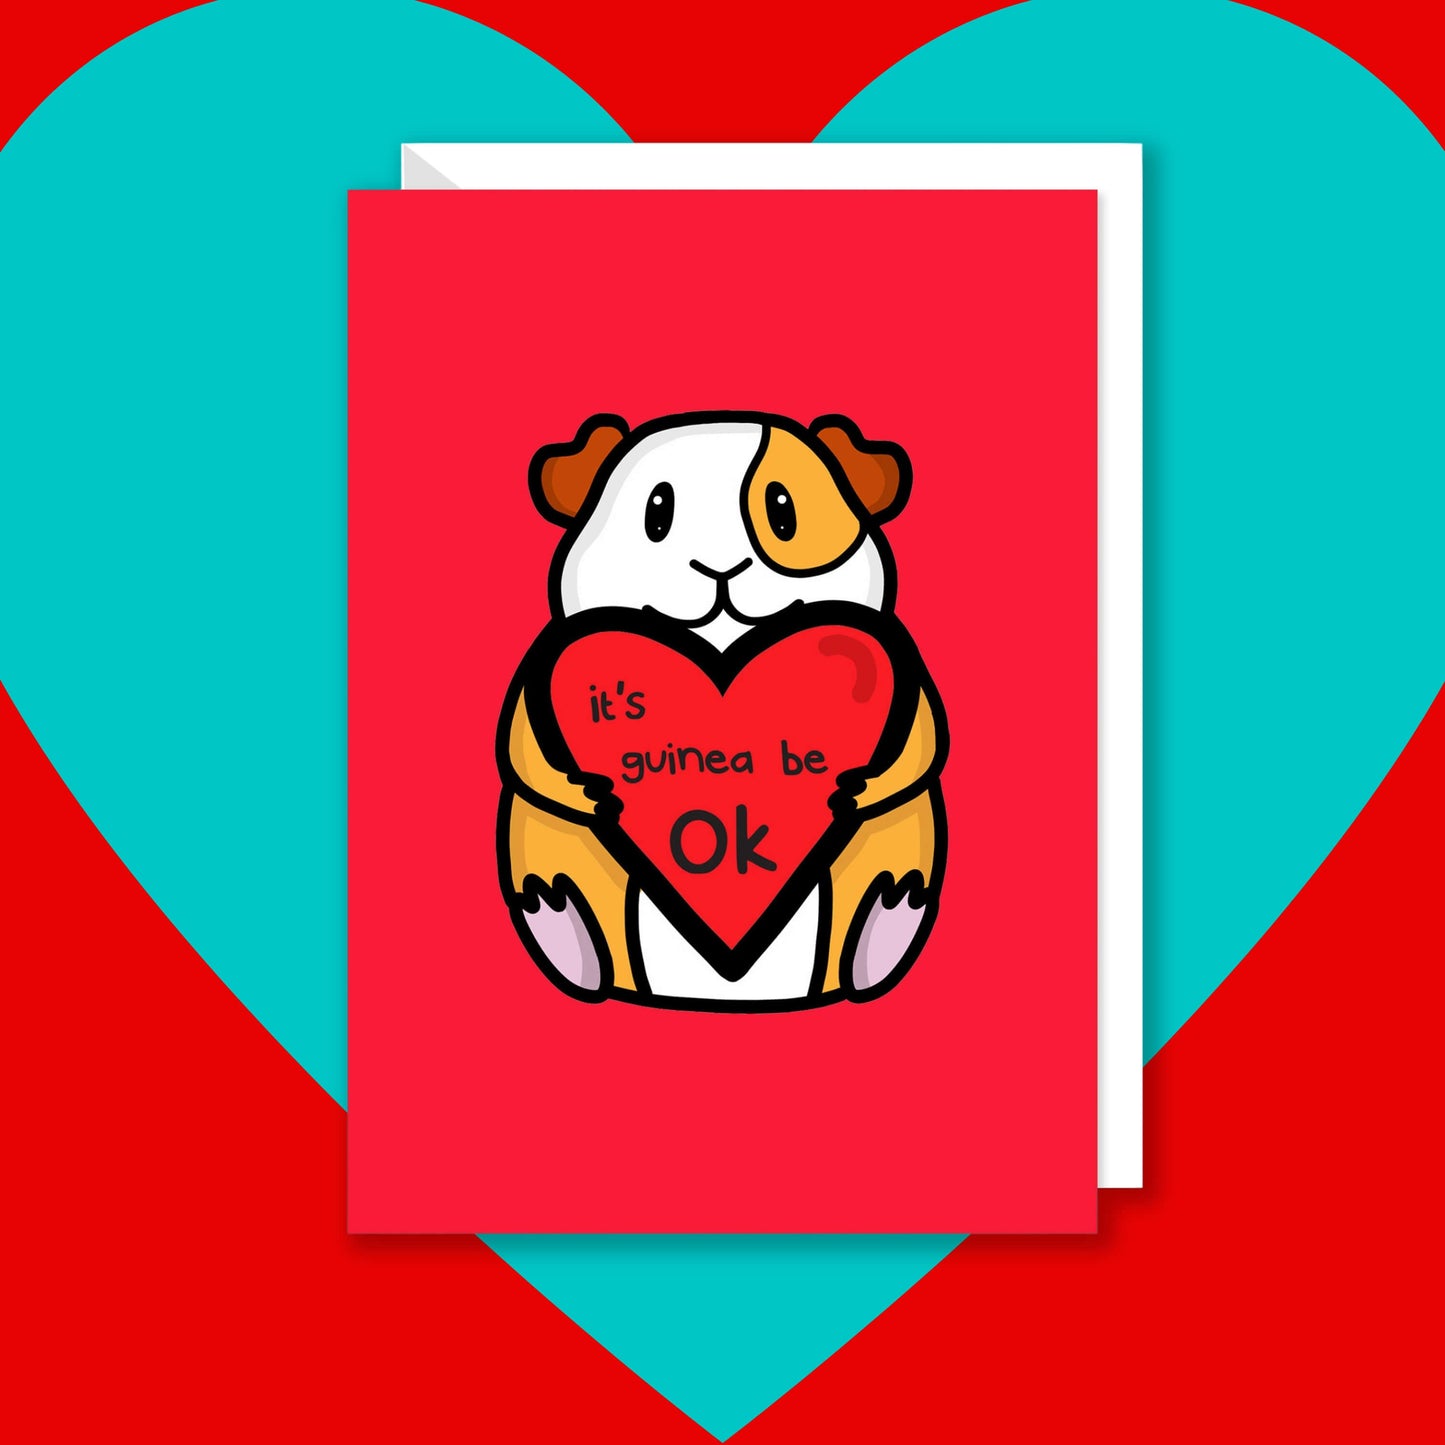 The It's Gonna Be OK Guinea Pig Card on a red and blue background with a white envelope underneath. The red a6 greeting card features a smiling orange and white guinea pig sat down holding a red heart with black text reading 'it's guinea be ok'. The hand drawn design is a perfect send a hug card as a gentle positive reminder.